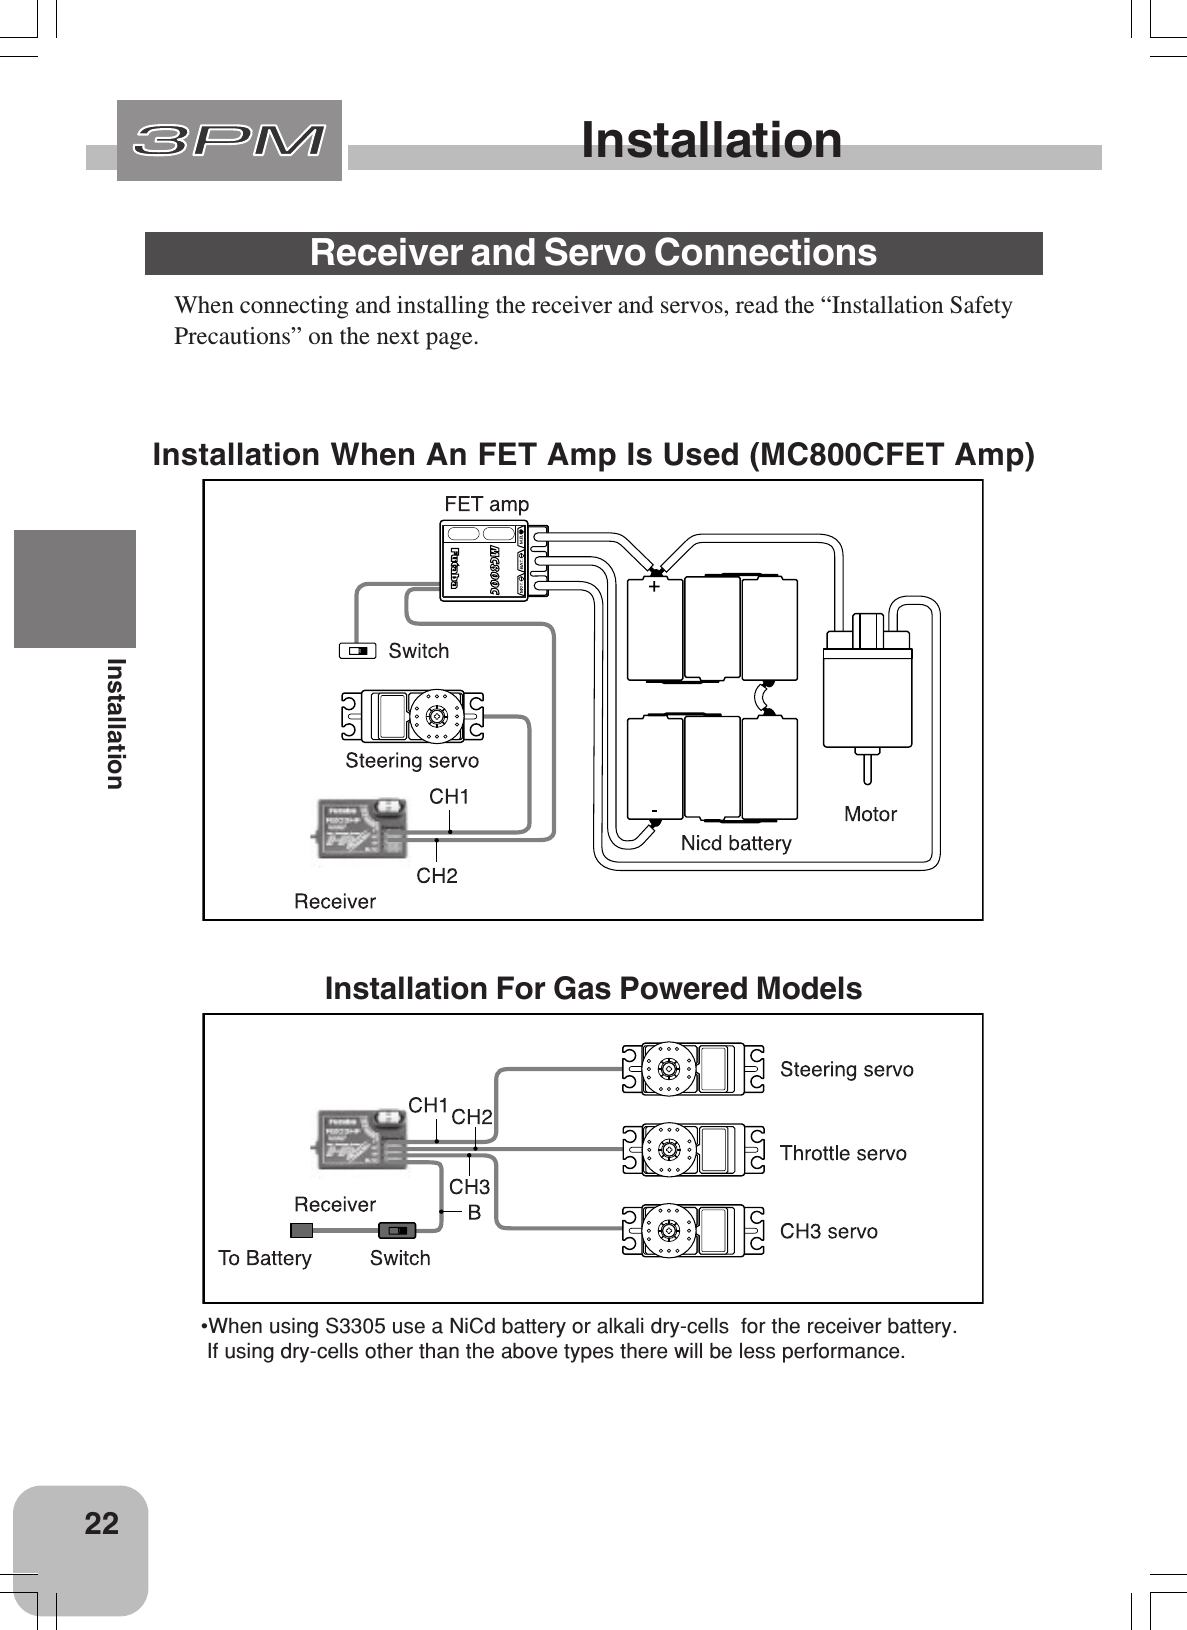 22InstallationInstallationReceiver and Servo ConnectionsInstallation When An FET Amp Is Used (MC800CFET Amp)When connecting and installing the receiver and servos, read the “Installation SafetyPrecautions” on the next page.Installation For Gas Powered Models•When using S3305 use a NiCd battery or alkali dry-cells  for the receiver battery. If using dry-cells other than the above types there will be less performance.